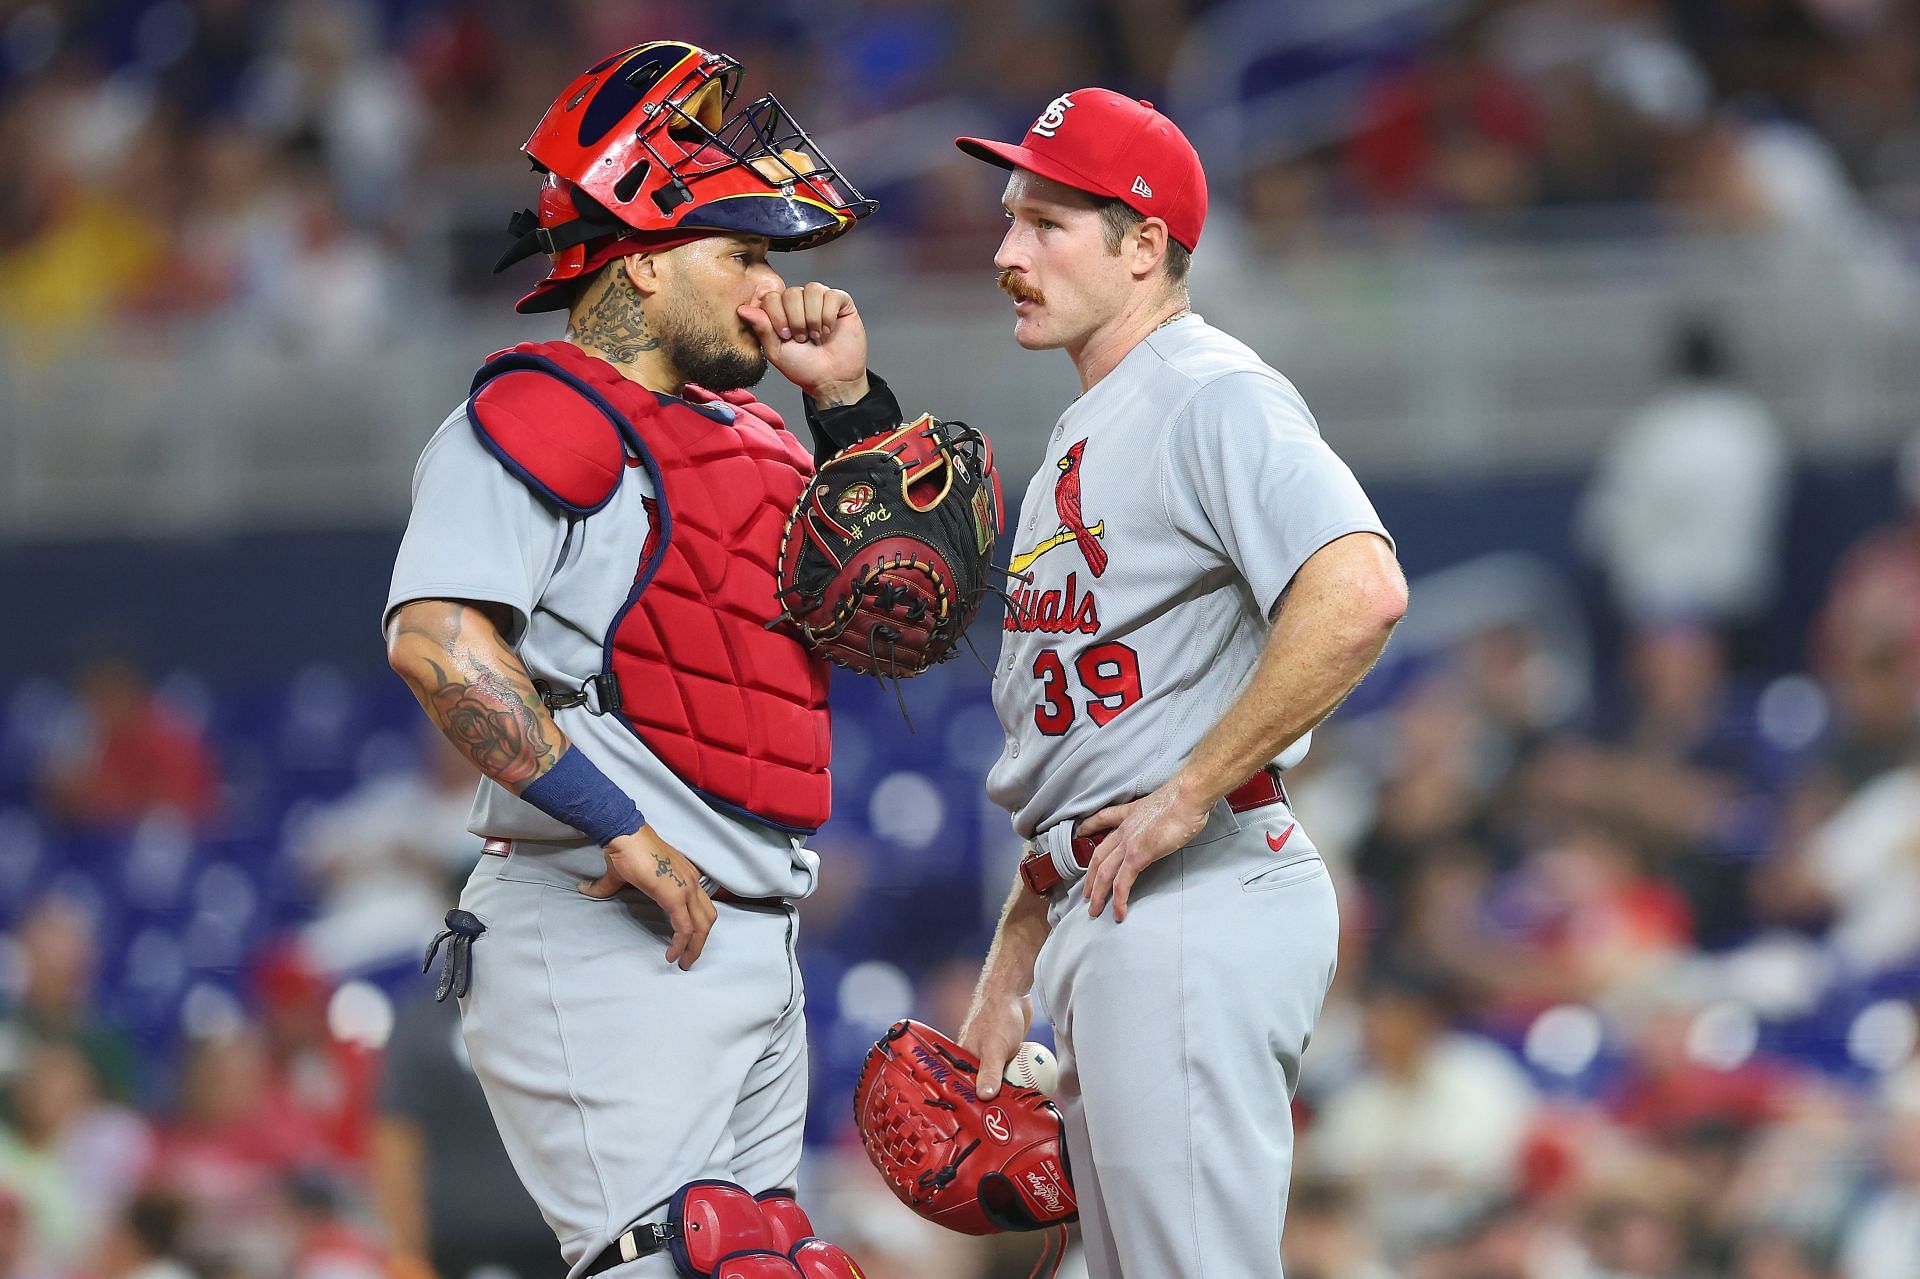 Yadi Molina Hopes To Guide Team Puerto Rico To First Title In